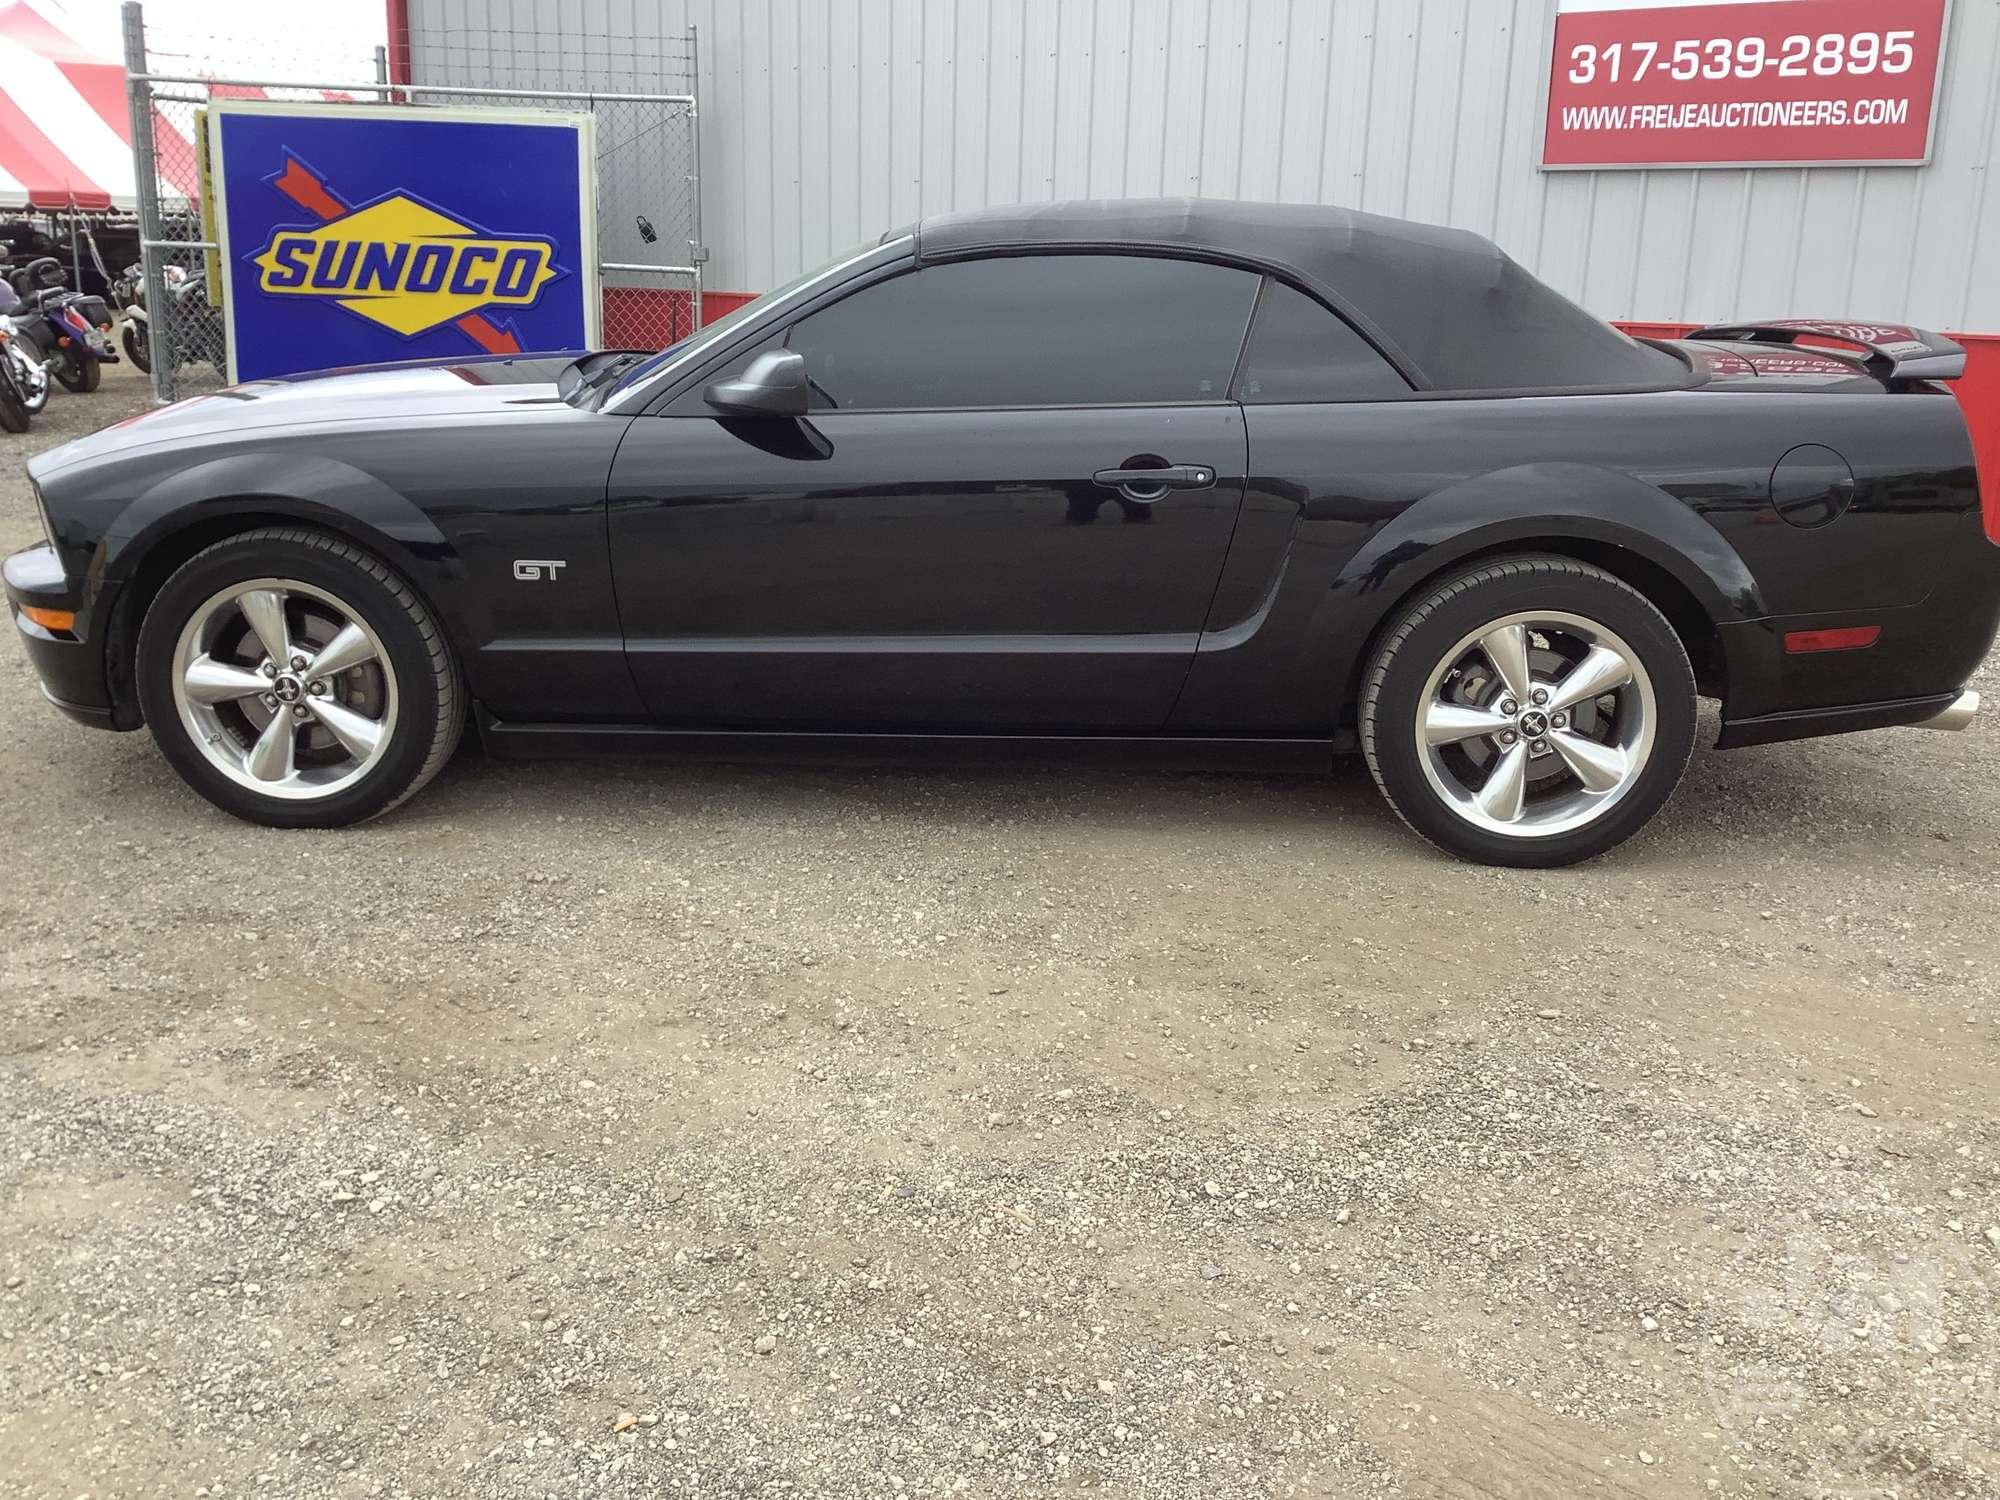 2007 FORD MUSTANG GT VIN: 1ZVHT85H475323193 COVERTIBLE